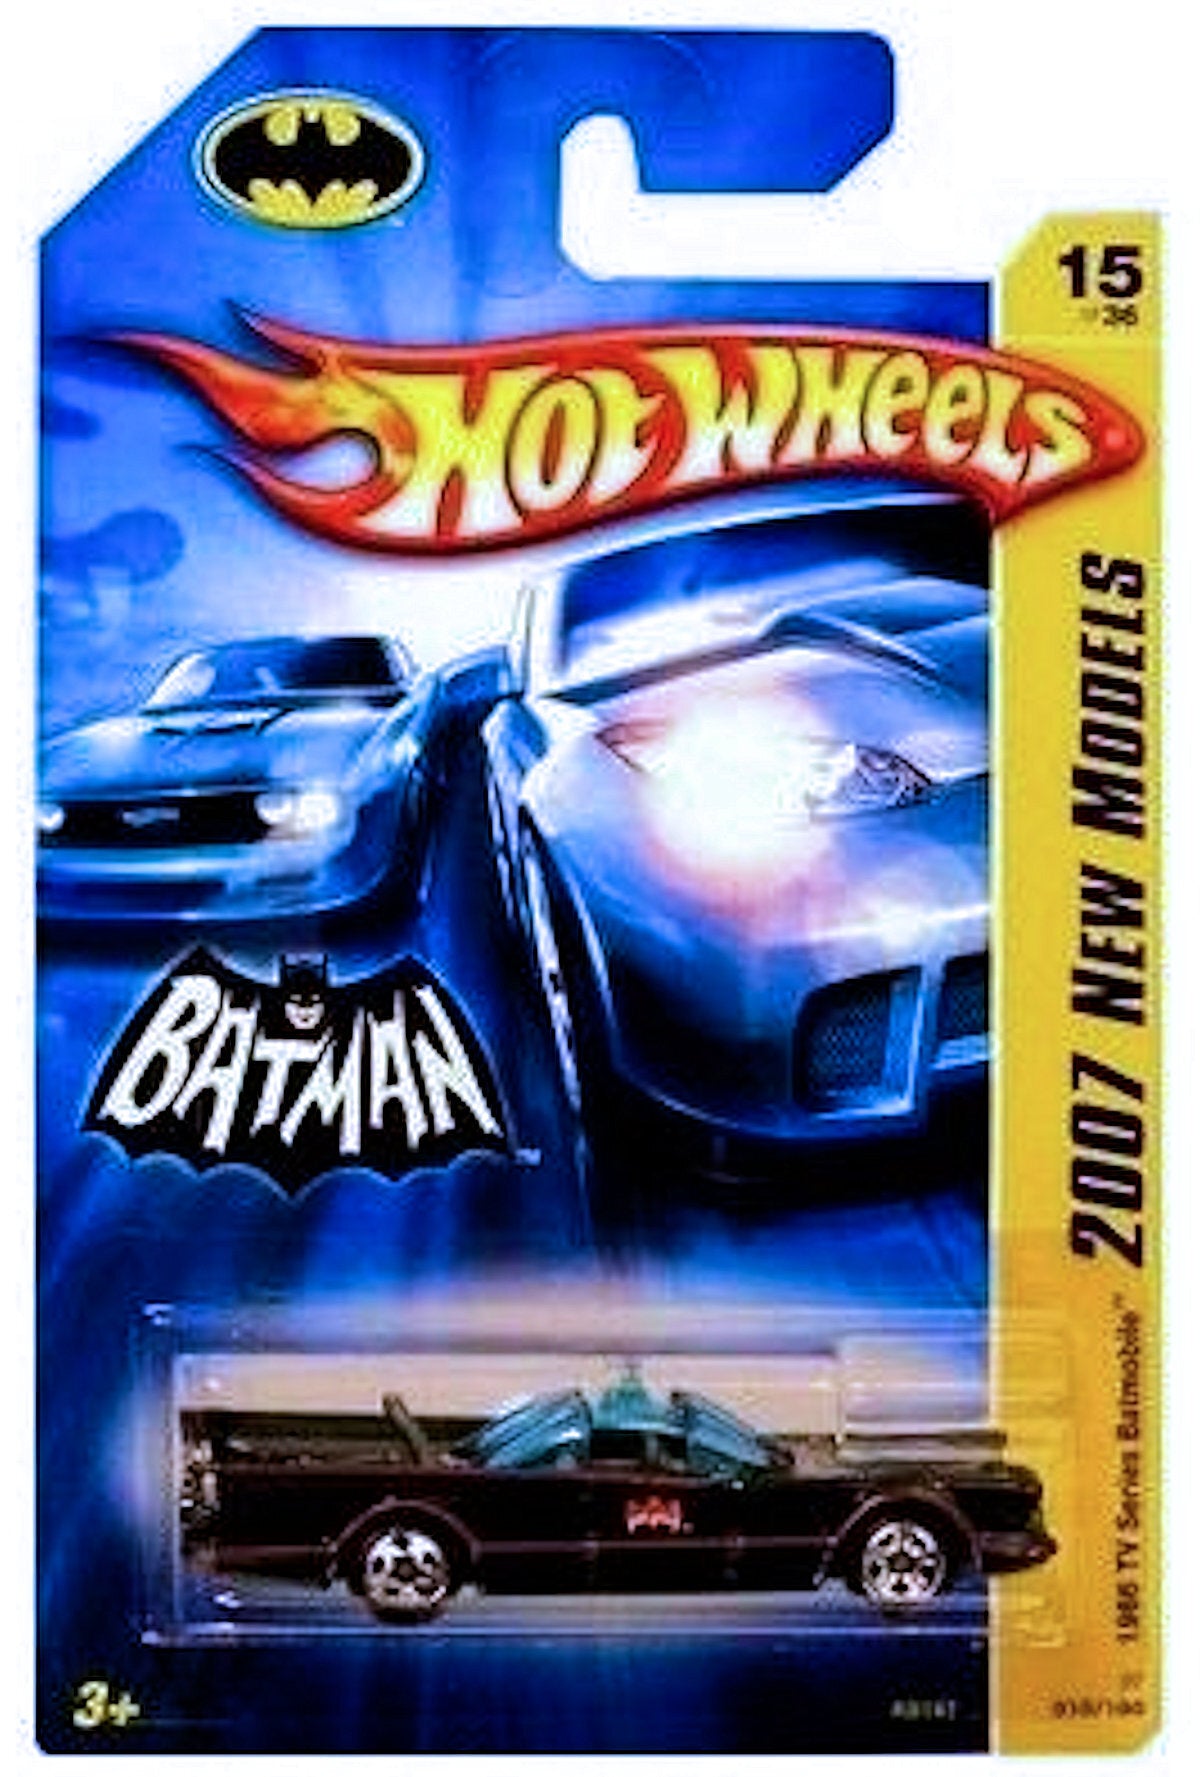 Hot Wheels 2007 - Collector # 015/180 - New Models 15/36 - 1966 TV Series Batmobile - Black - 5 Spokes - Smooth Grille